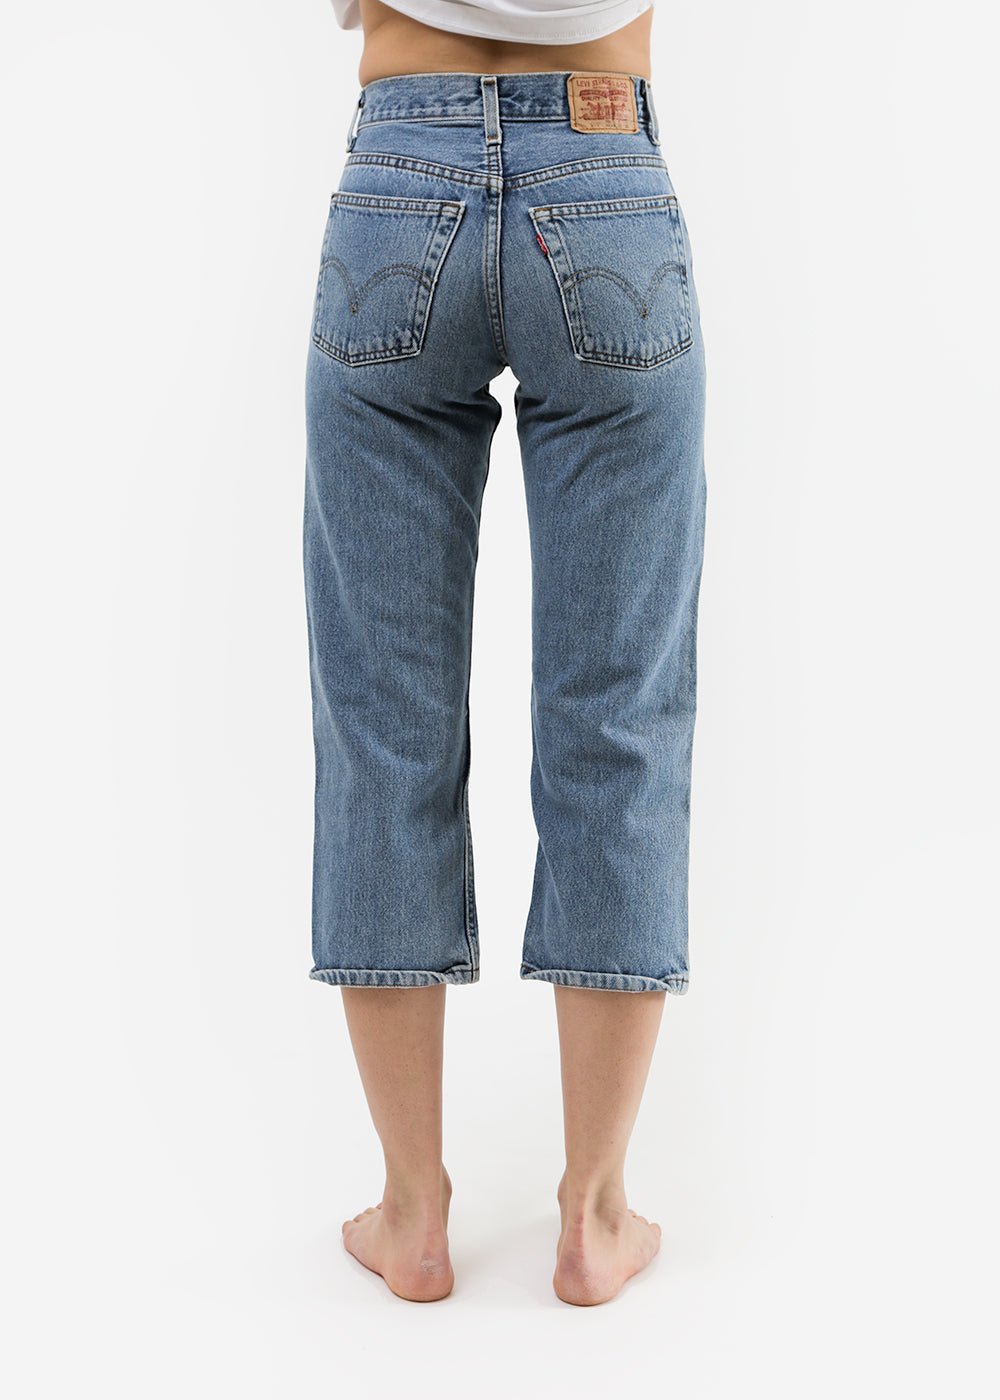 https://newclassics.ca/cdn/shop/products/denim-refinery-vintage-levis-569-new-classics-studios-sustainable-and-ethical-fashion-canada-999595_1000x.jpg?v=1687282539